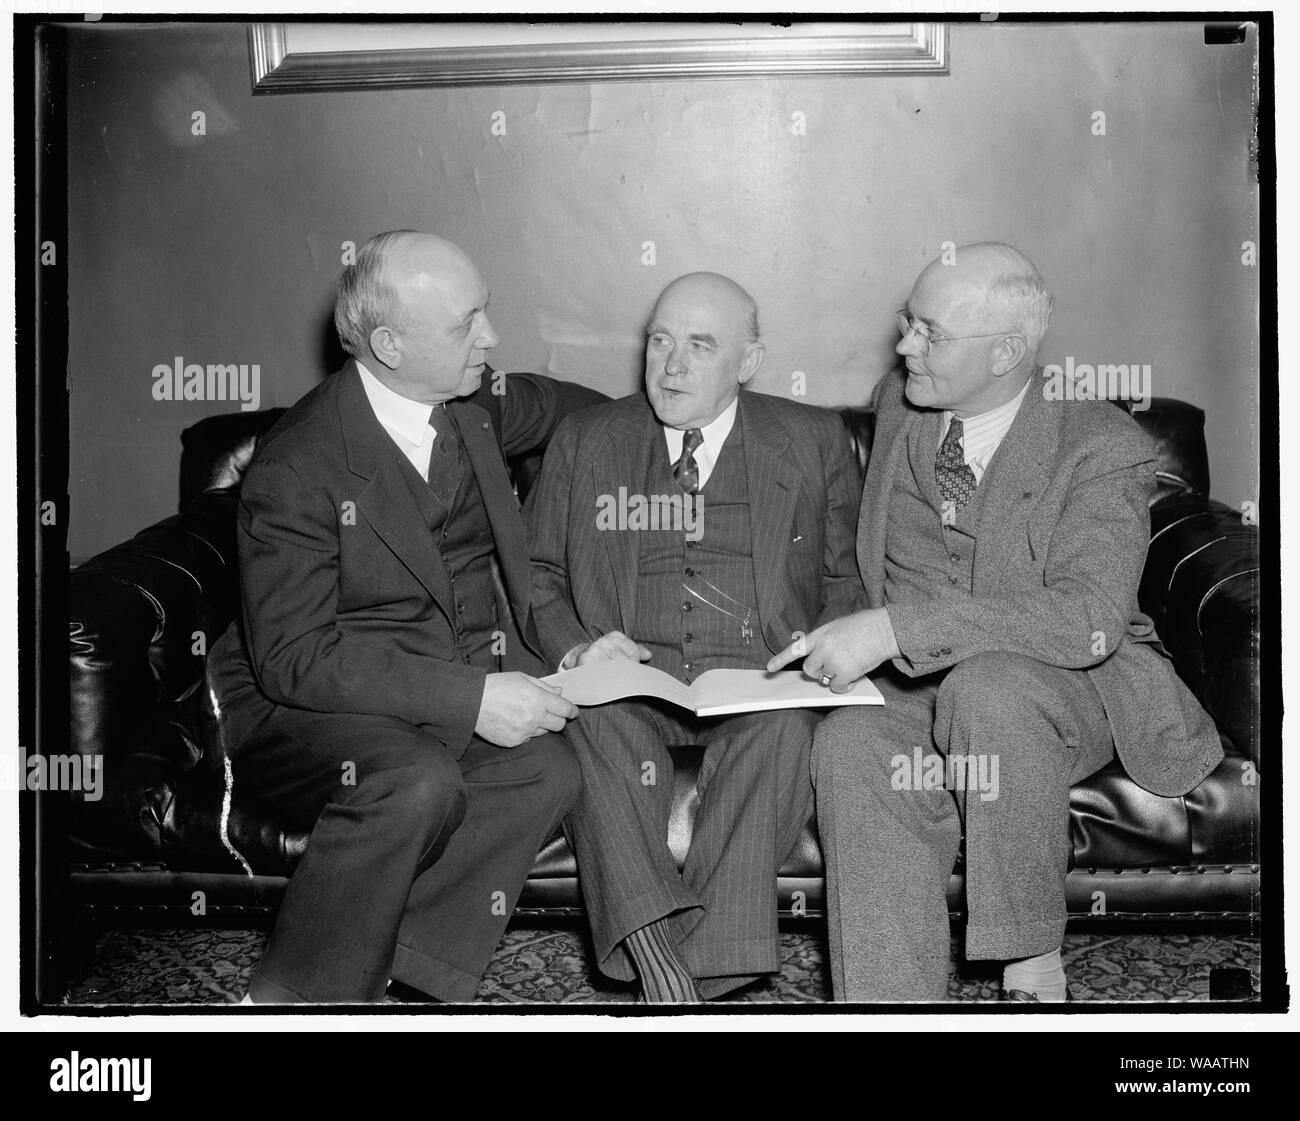 Co-authors discuss amendments to farm bill with Alabama senator. Washington, D.C., Nov. 30. Co-authors of the Senate Farm Bill, Senators George McGill of Kansas, (left) and Senator James P. Pope of Idaho, (right) discuss amendments to the bill now being written by Senator John B. Bankhead (center) of Alabama. Senator Bankhead has appealed to the Senate for enactment of the strongly compulsory cotton section of the bill to prevent disastrous fluctuations in the price of cotton which he said were 'threatening foreclosures all over the South. 11/30/37 Stock Photo